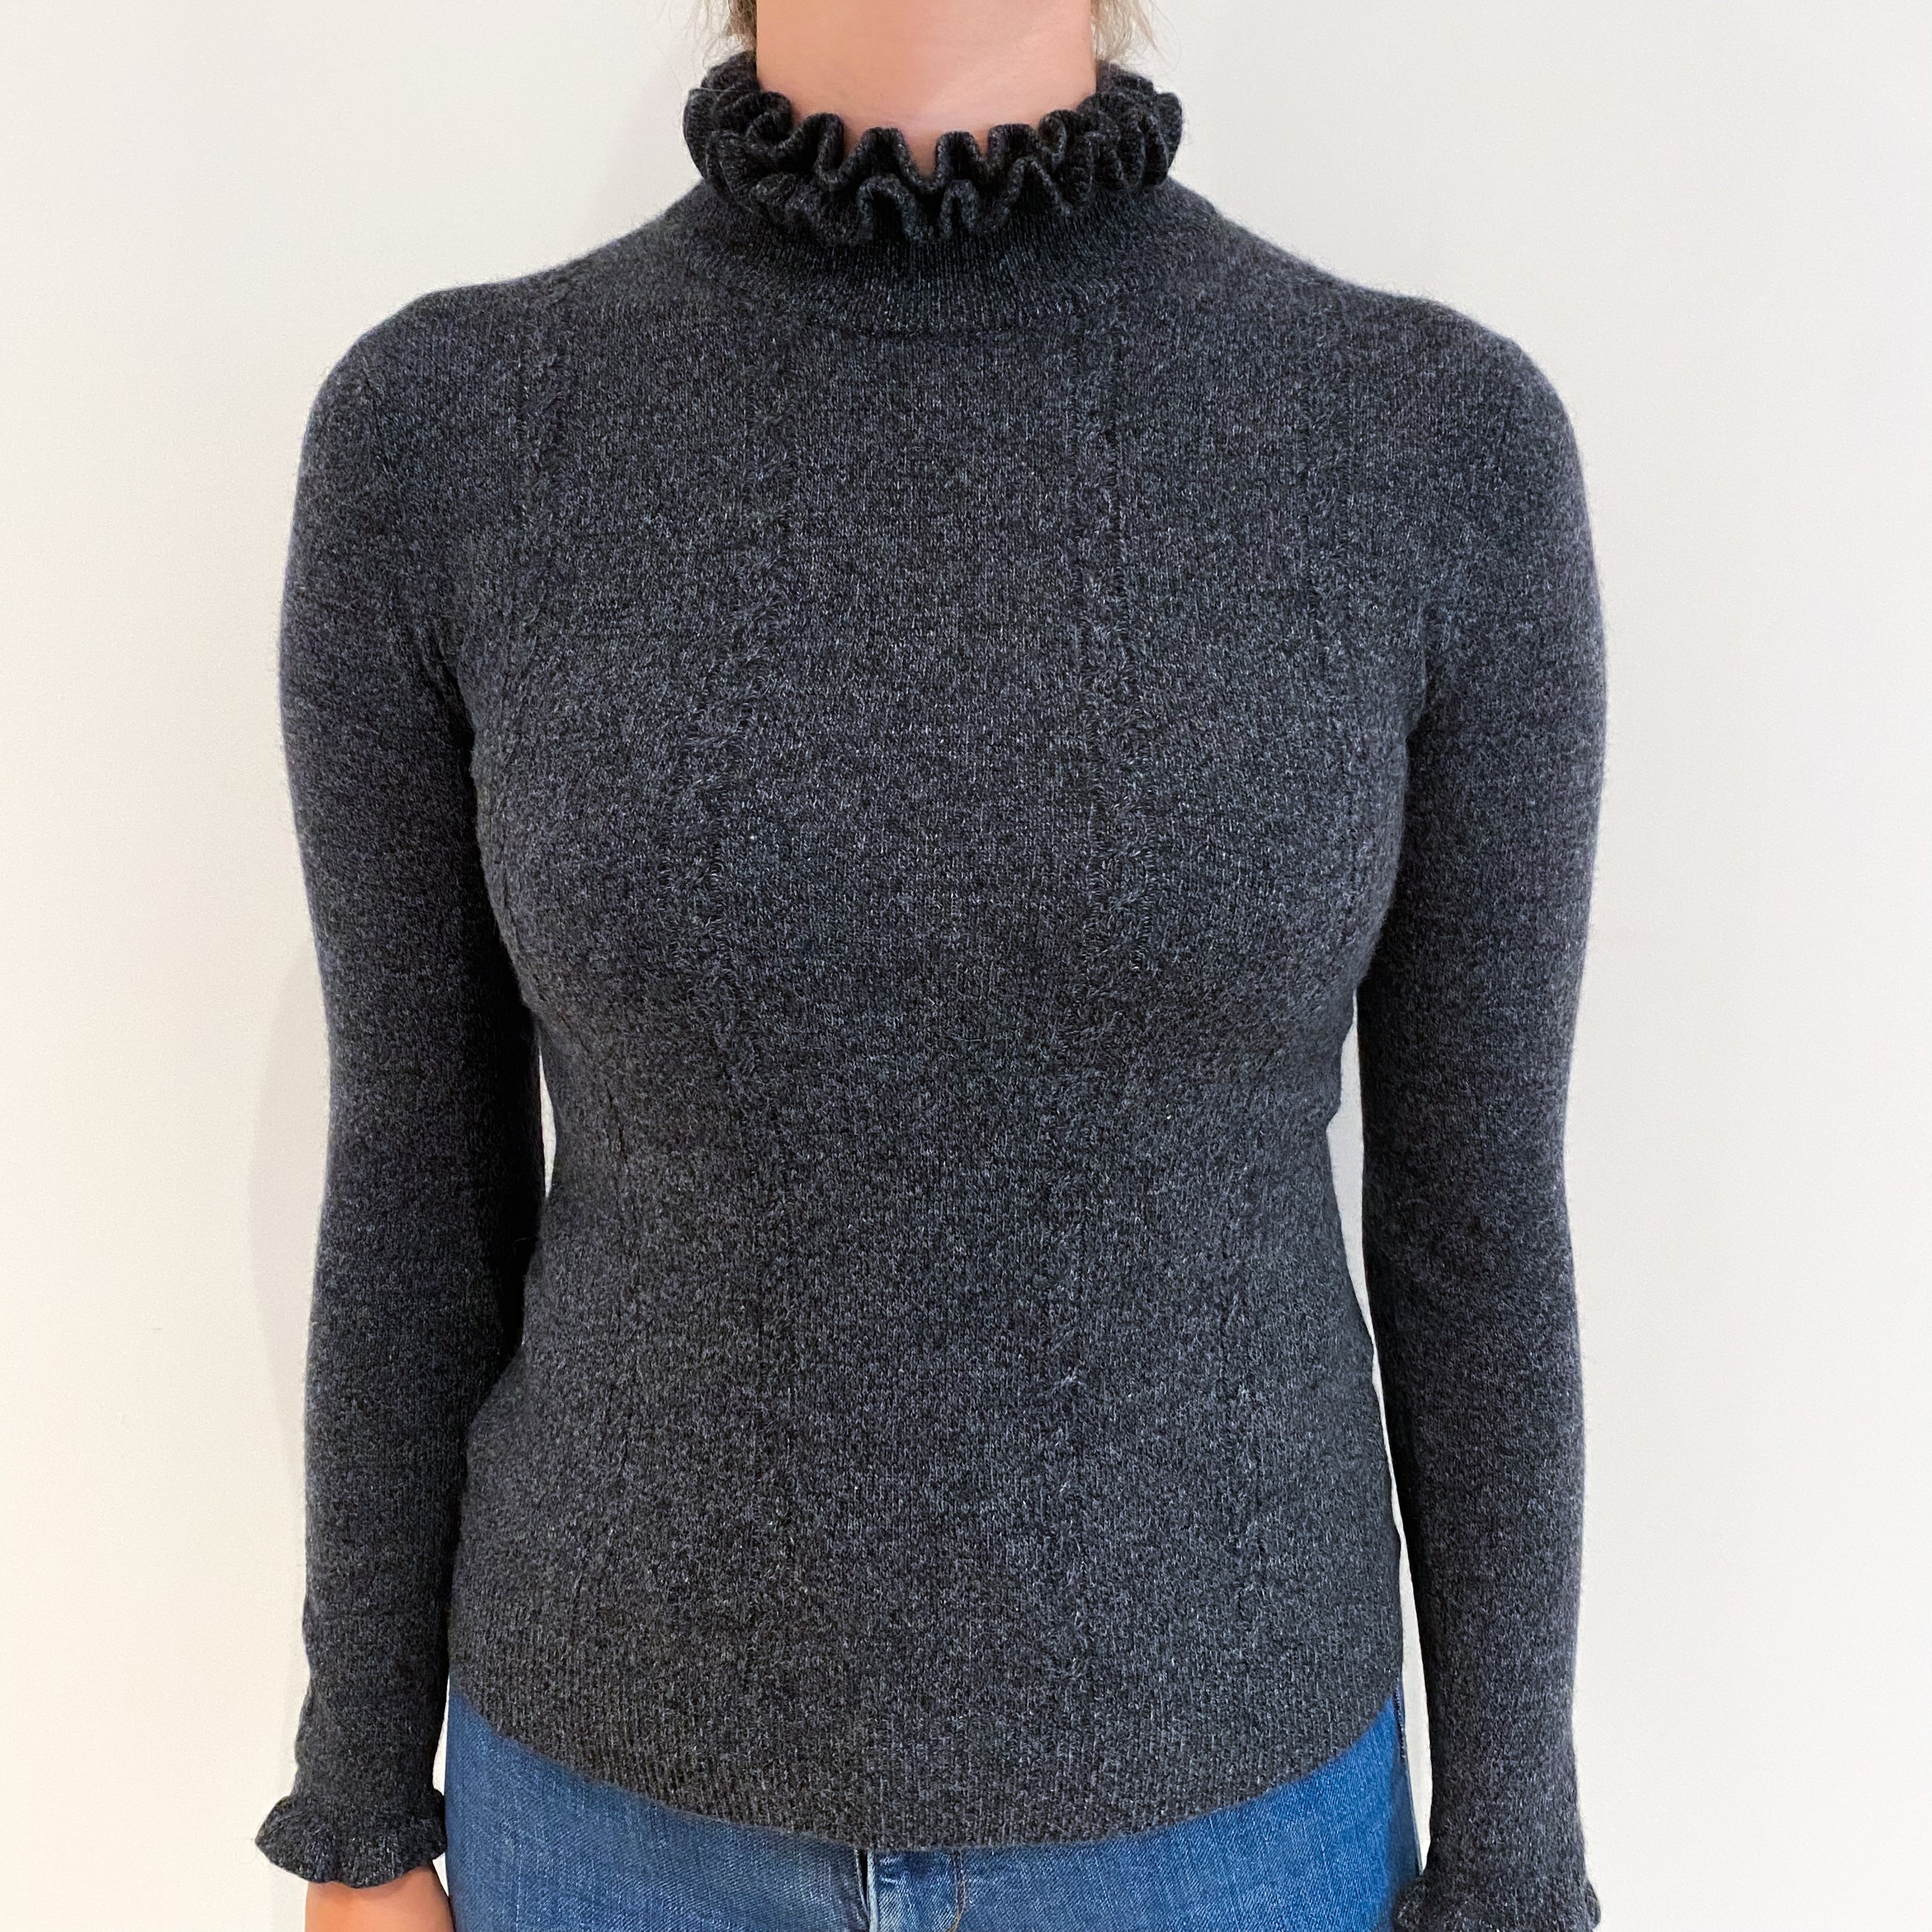 Charcoal Grey Marl Cashmere Turtle Neck Jumper Small